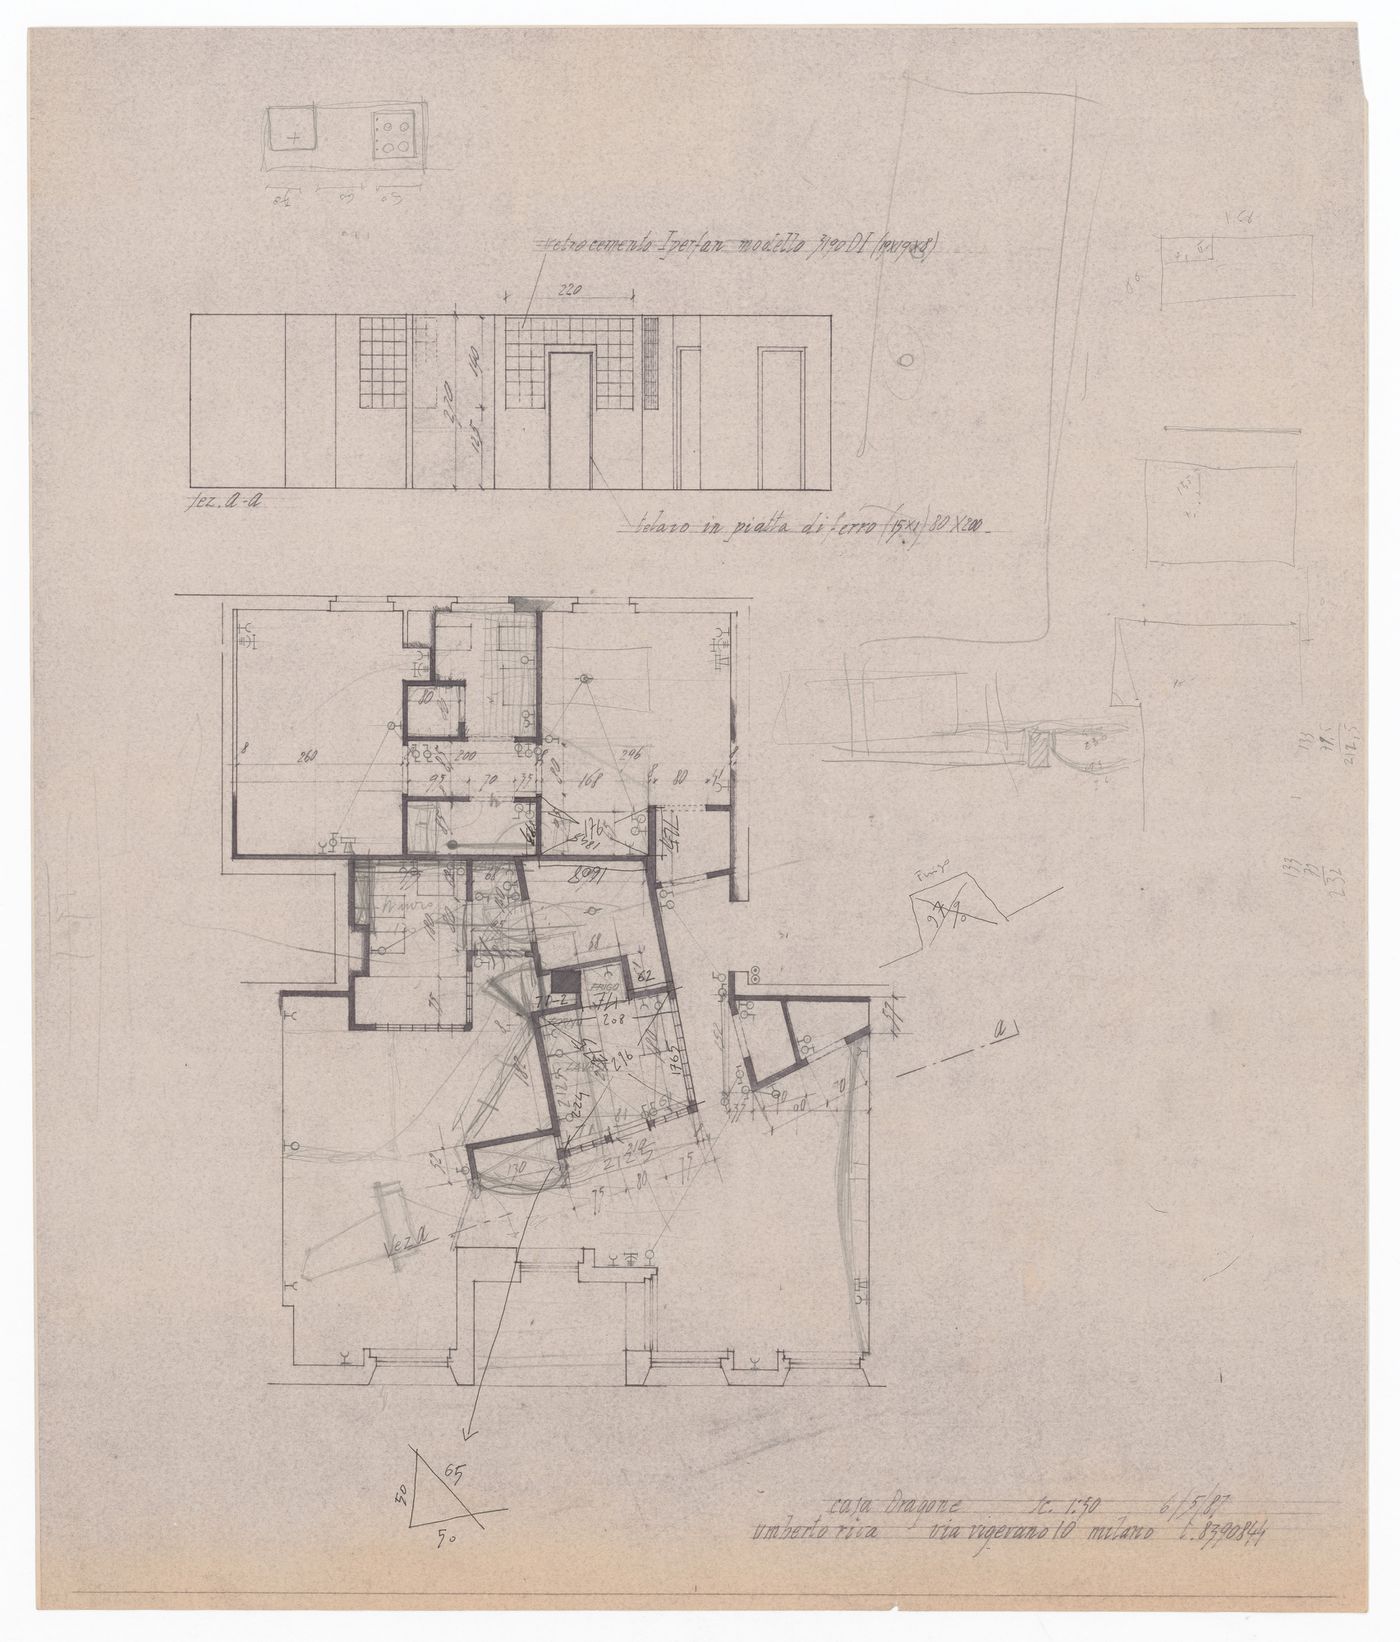 Elevation and floor plan with sketches for Casa Dragone e Paggi, Milan, Italy